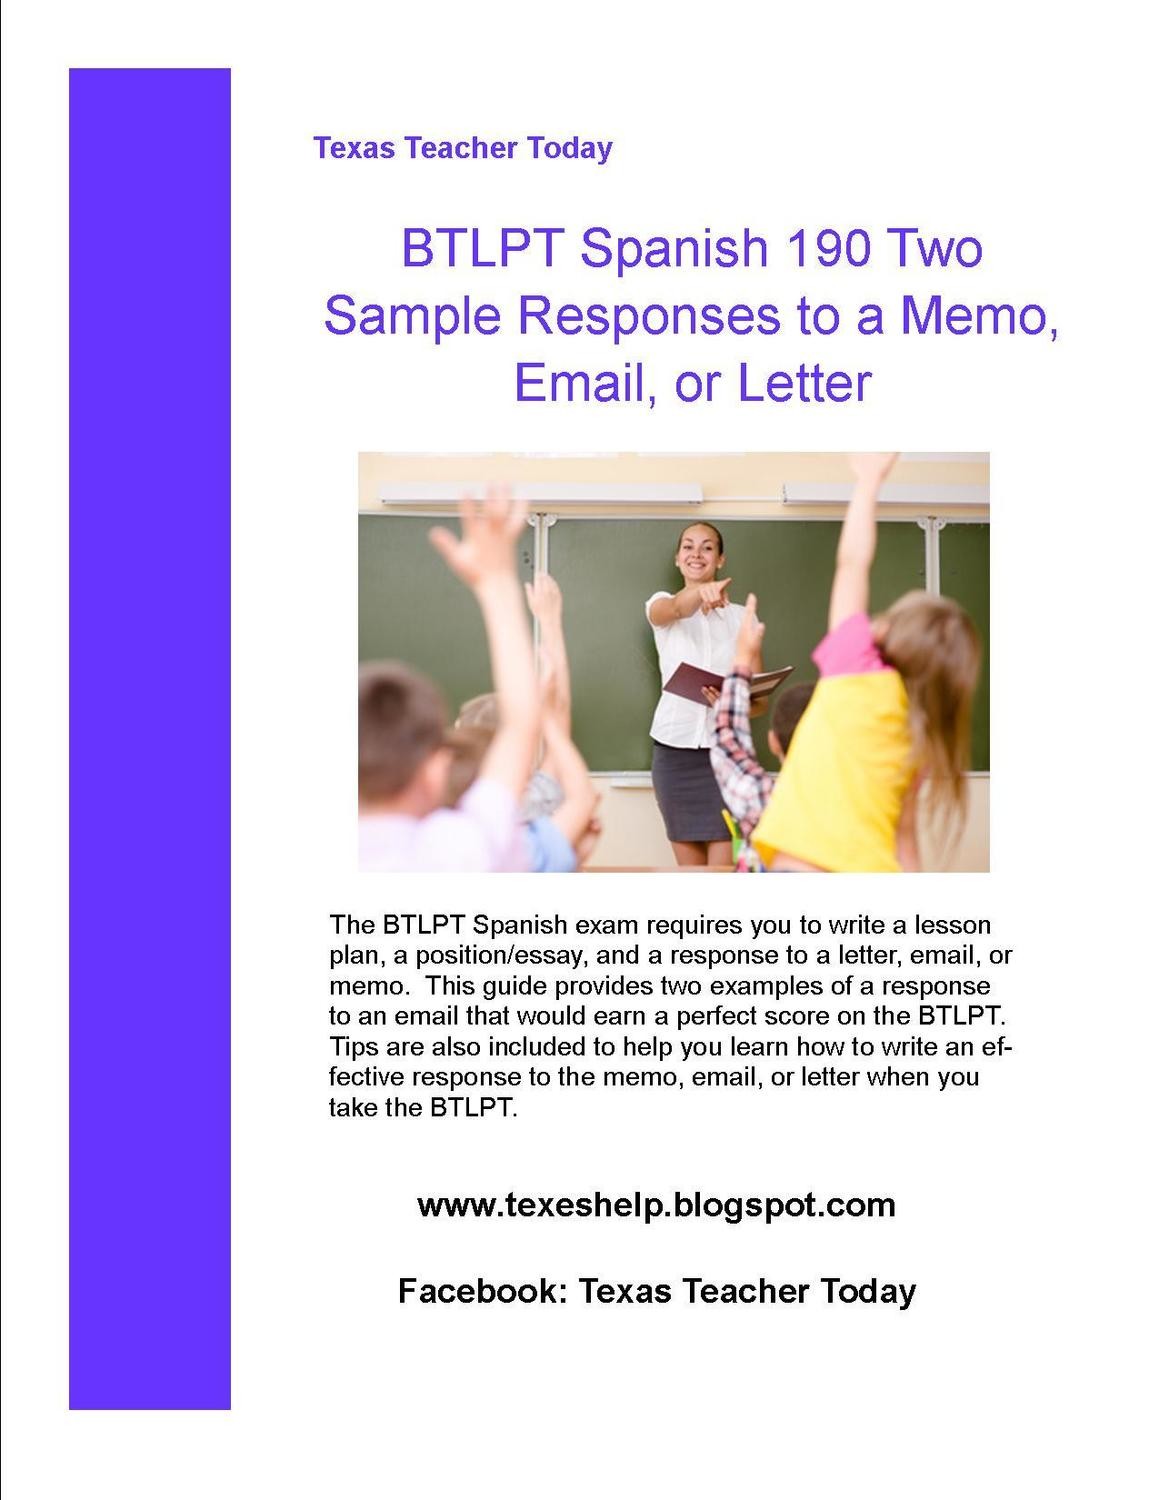 BTLPT Spanish Two Sample Responses to Email and Tips